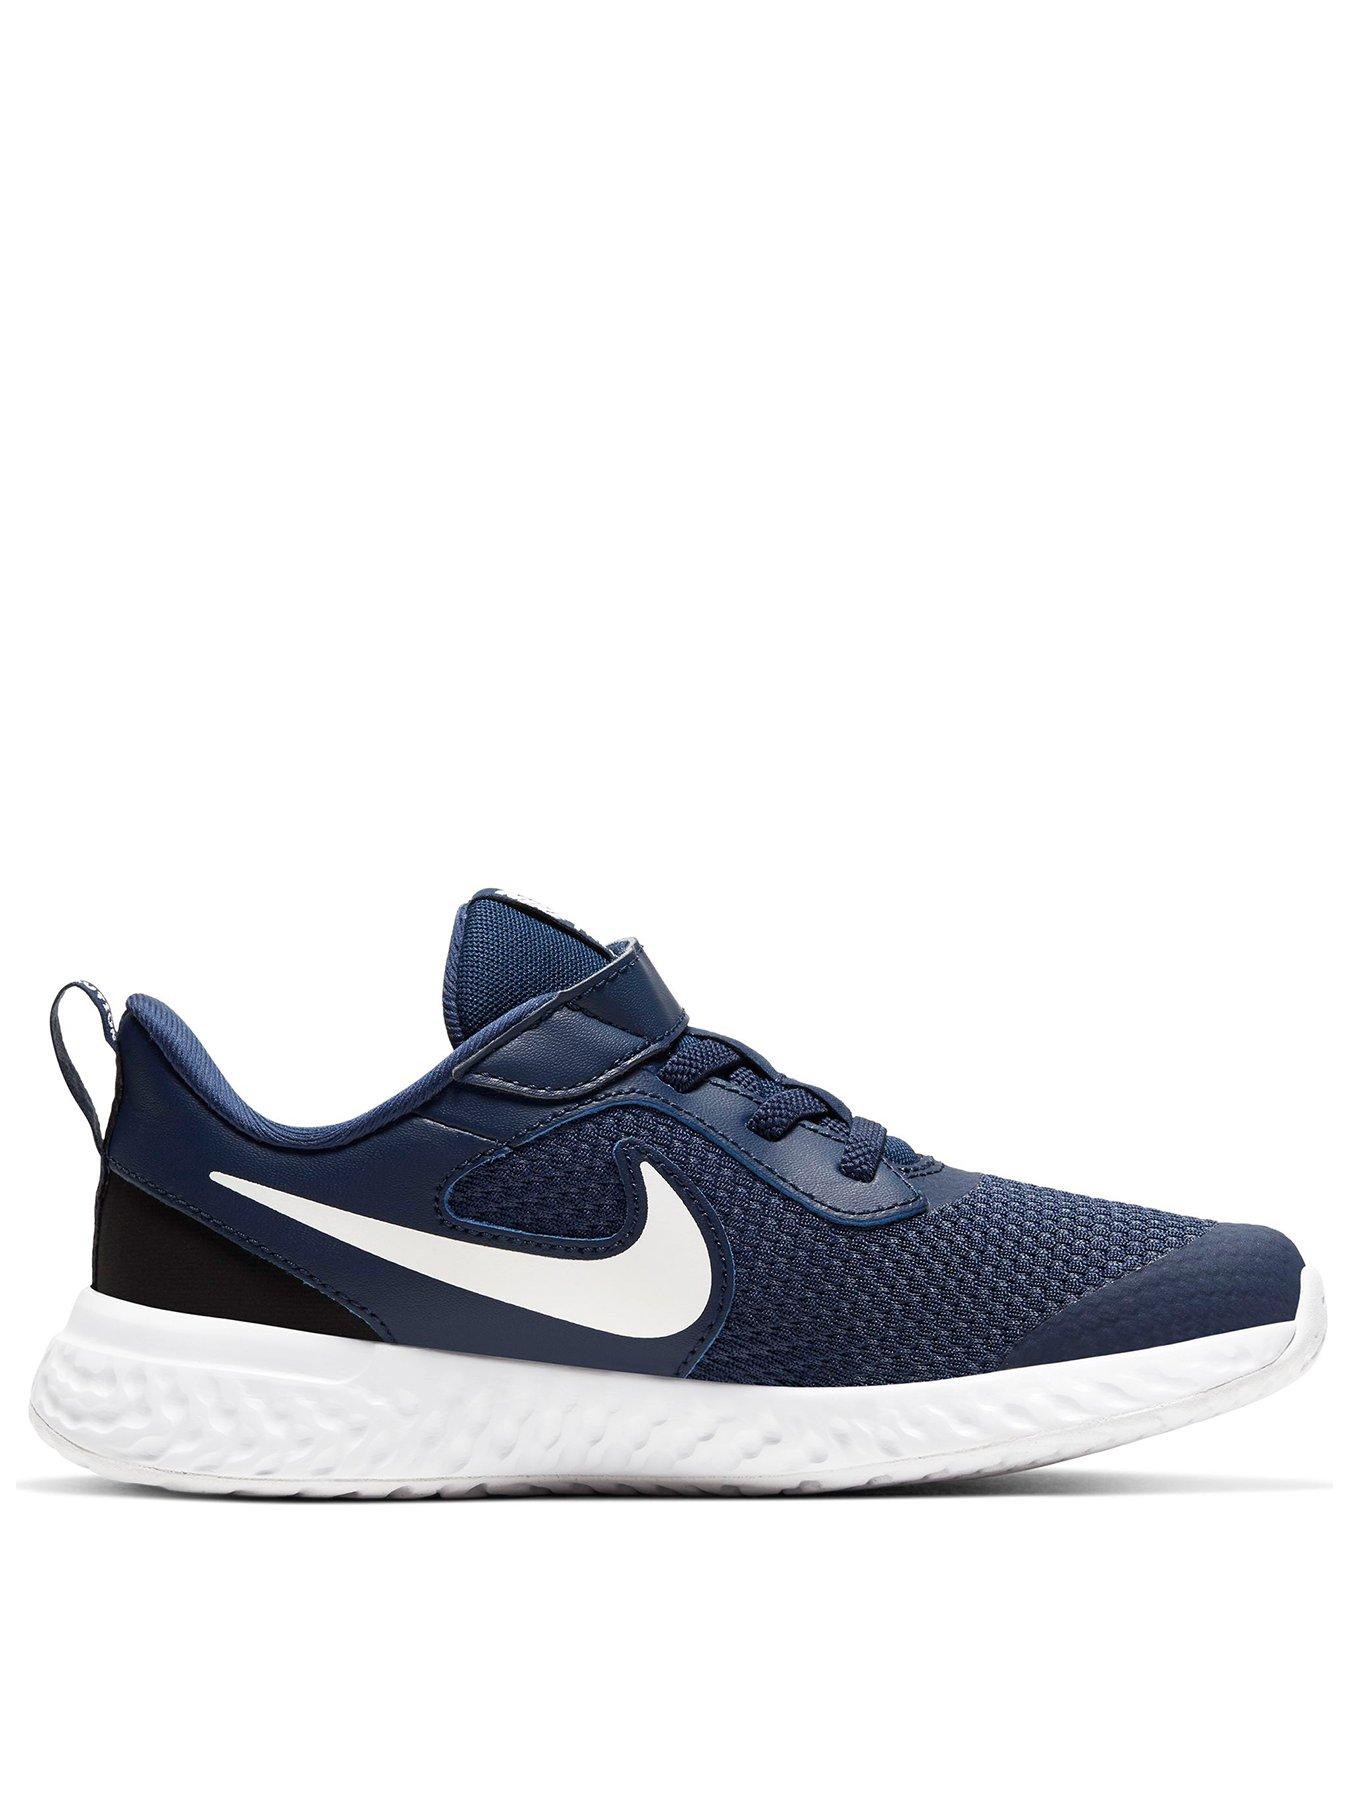 Nike Revolution 5 Younger Childrens Trainers - Navy/White | very.co.uk